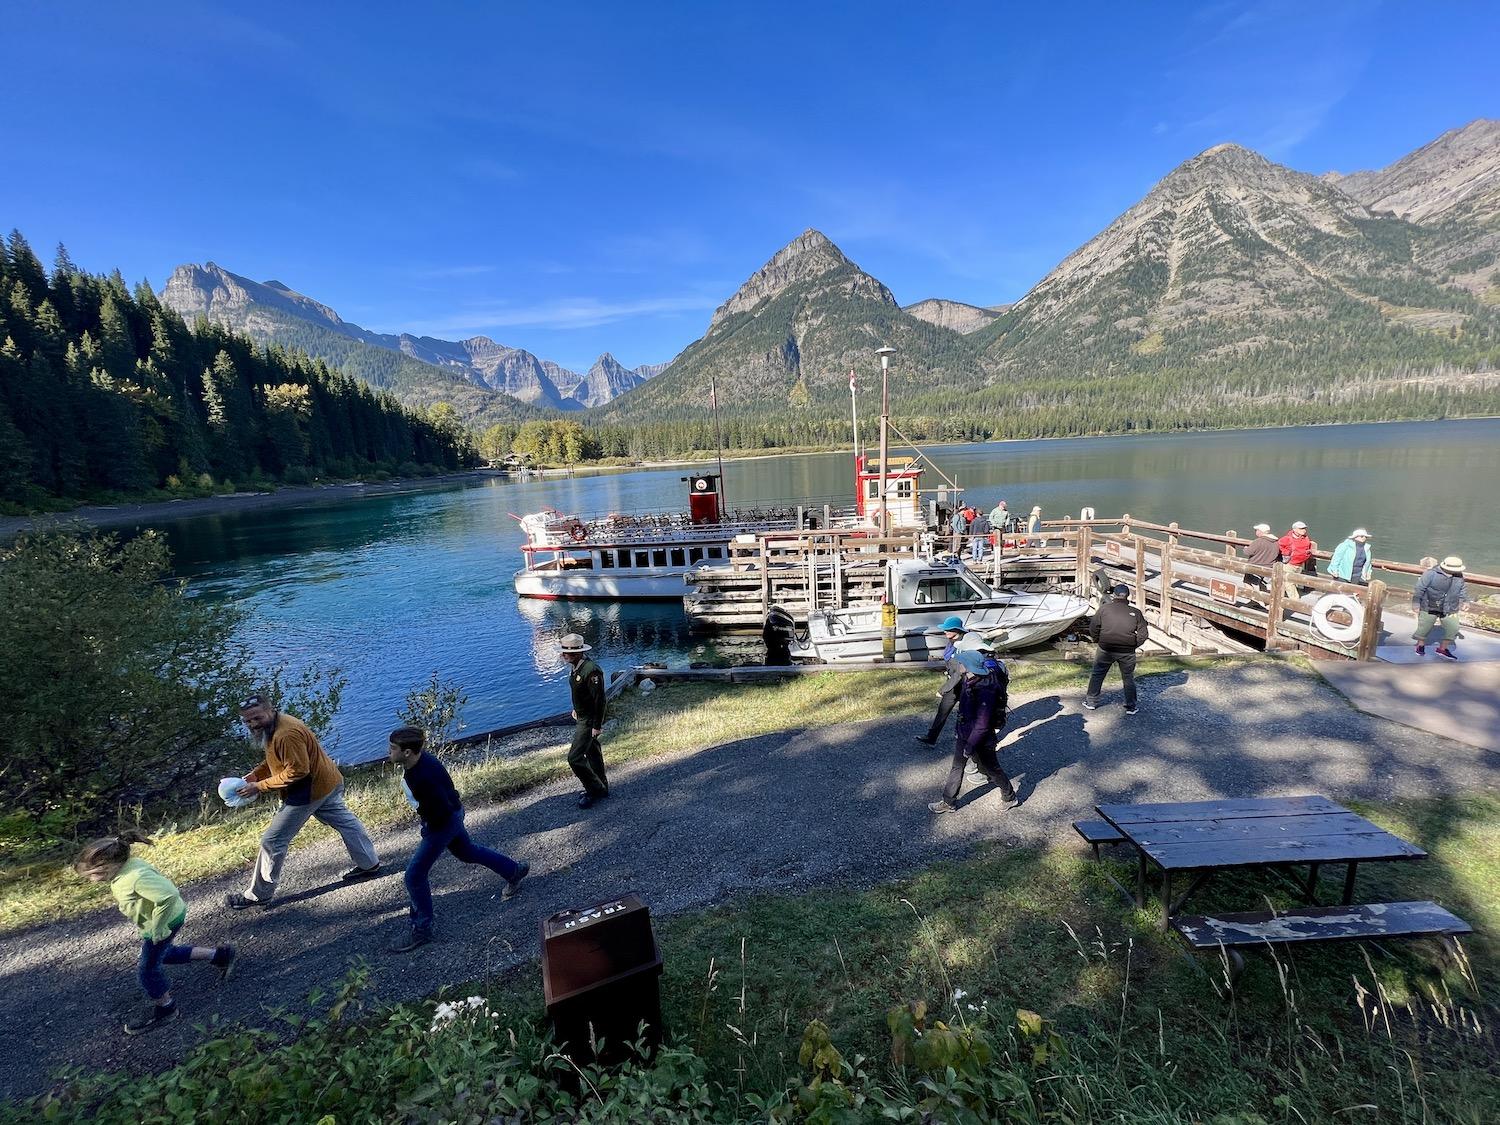 When the International lands at Goat Haunt in Glacier National Park, guests have 30 minutes to explore before the boat returns to Waterton Lakes National Park in Alberta.